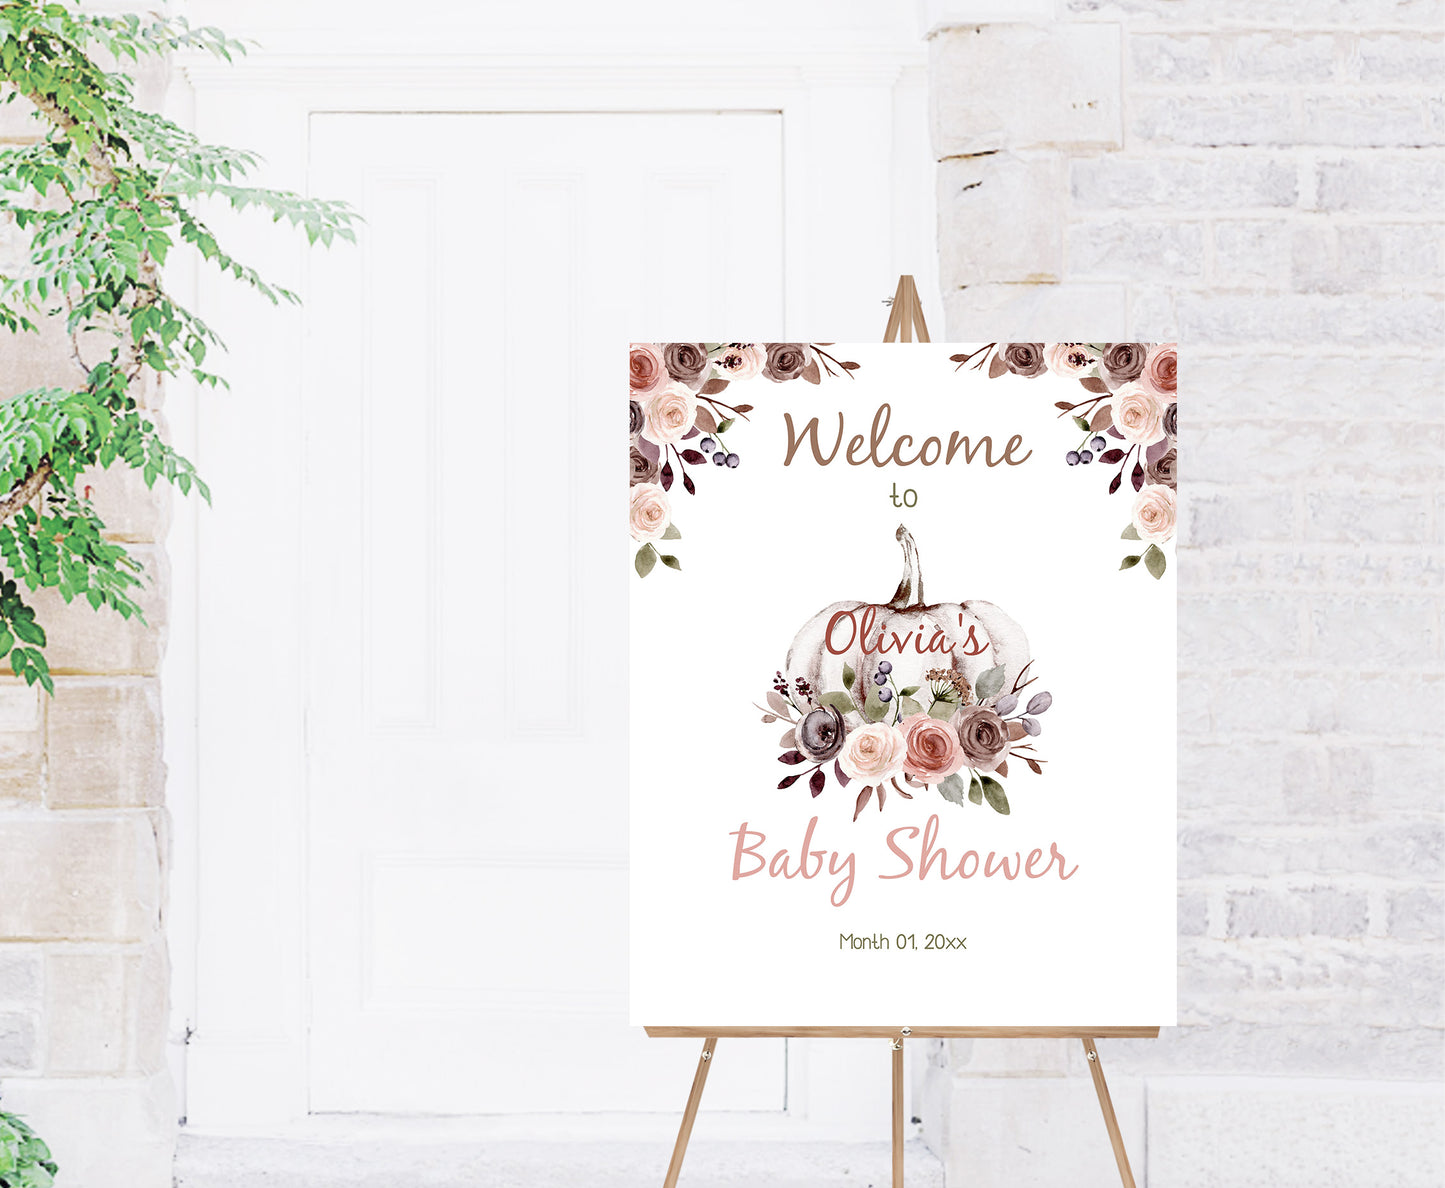 Editable Pumpkin Welcome Sign| Fall Baby Shower Decorations - 30I